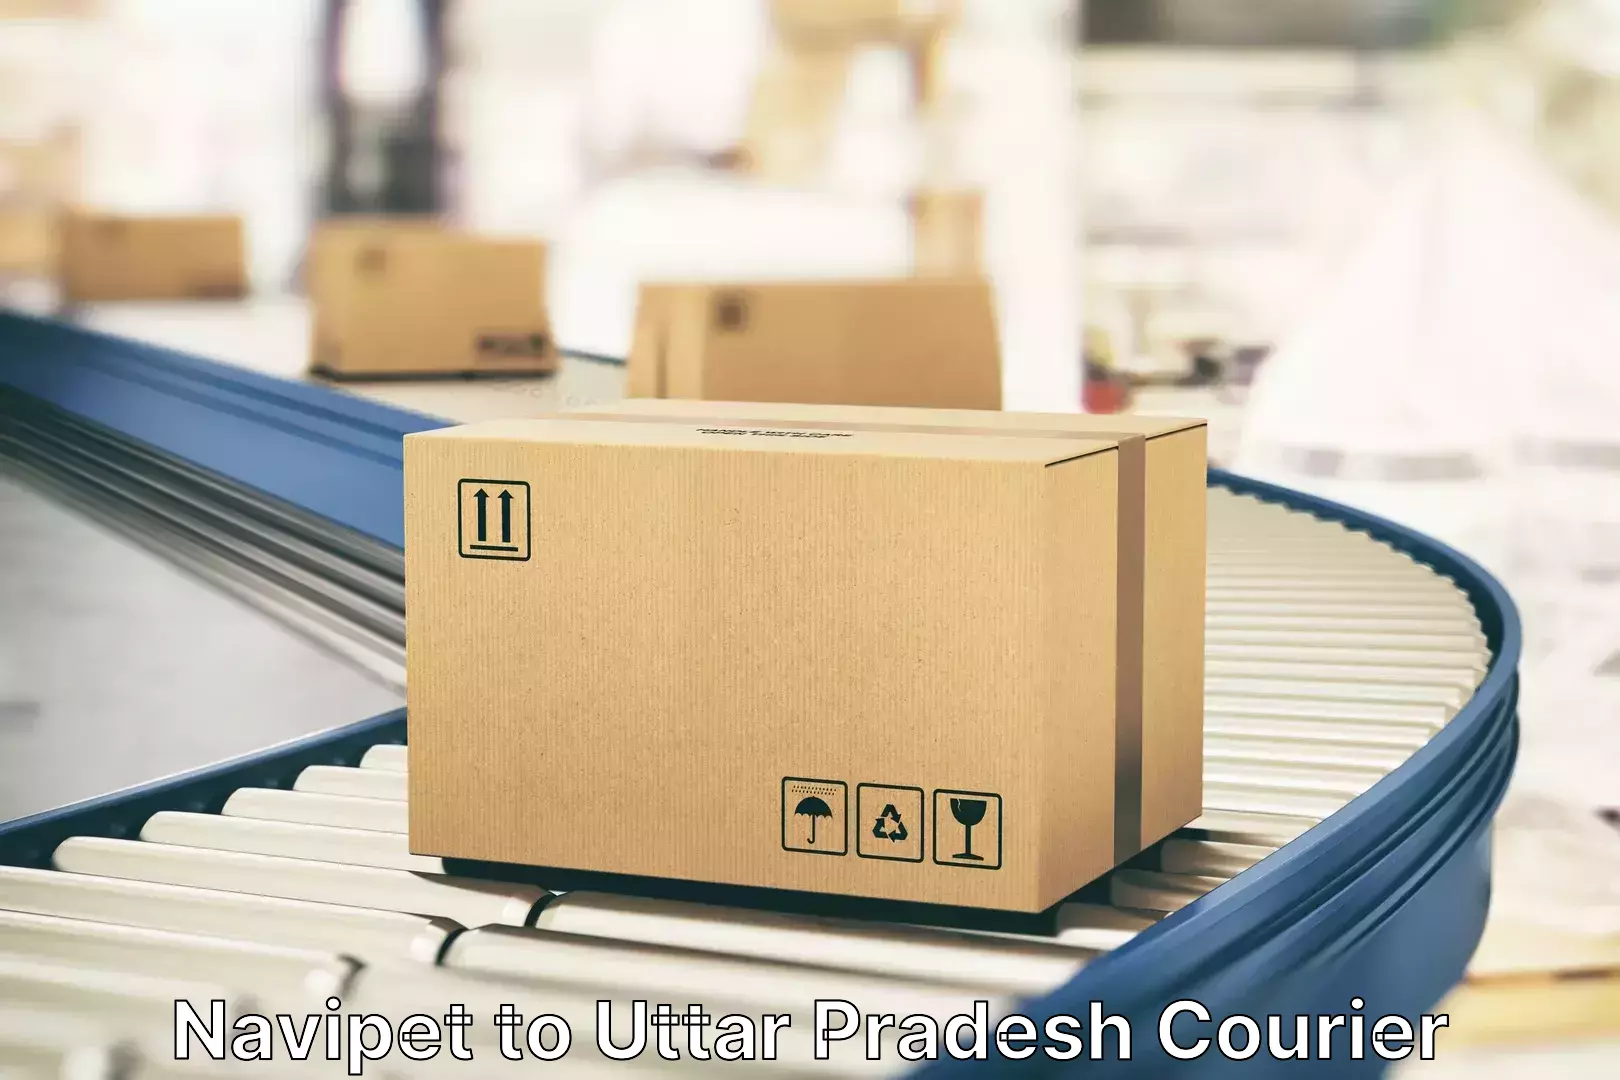 Hassle-free luggage shipping in Navipet to Shohratgarh